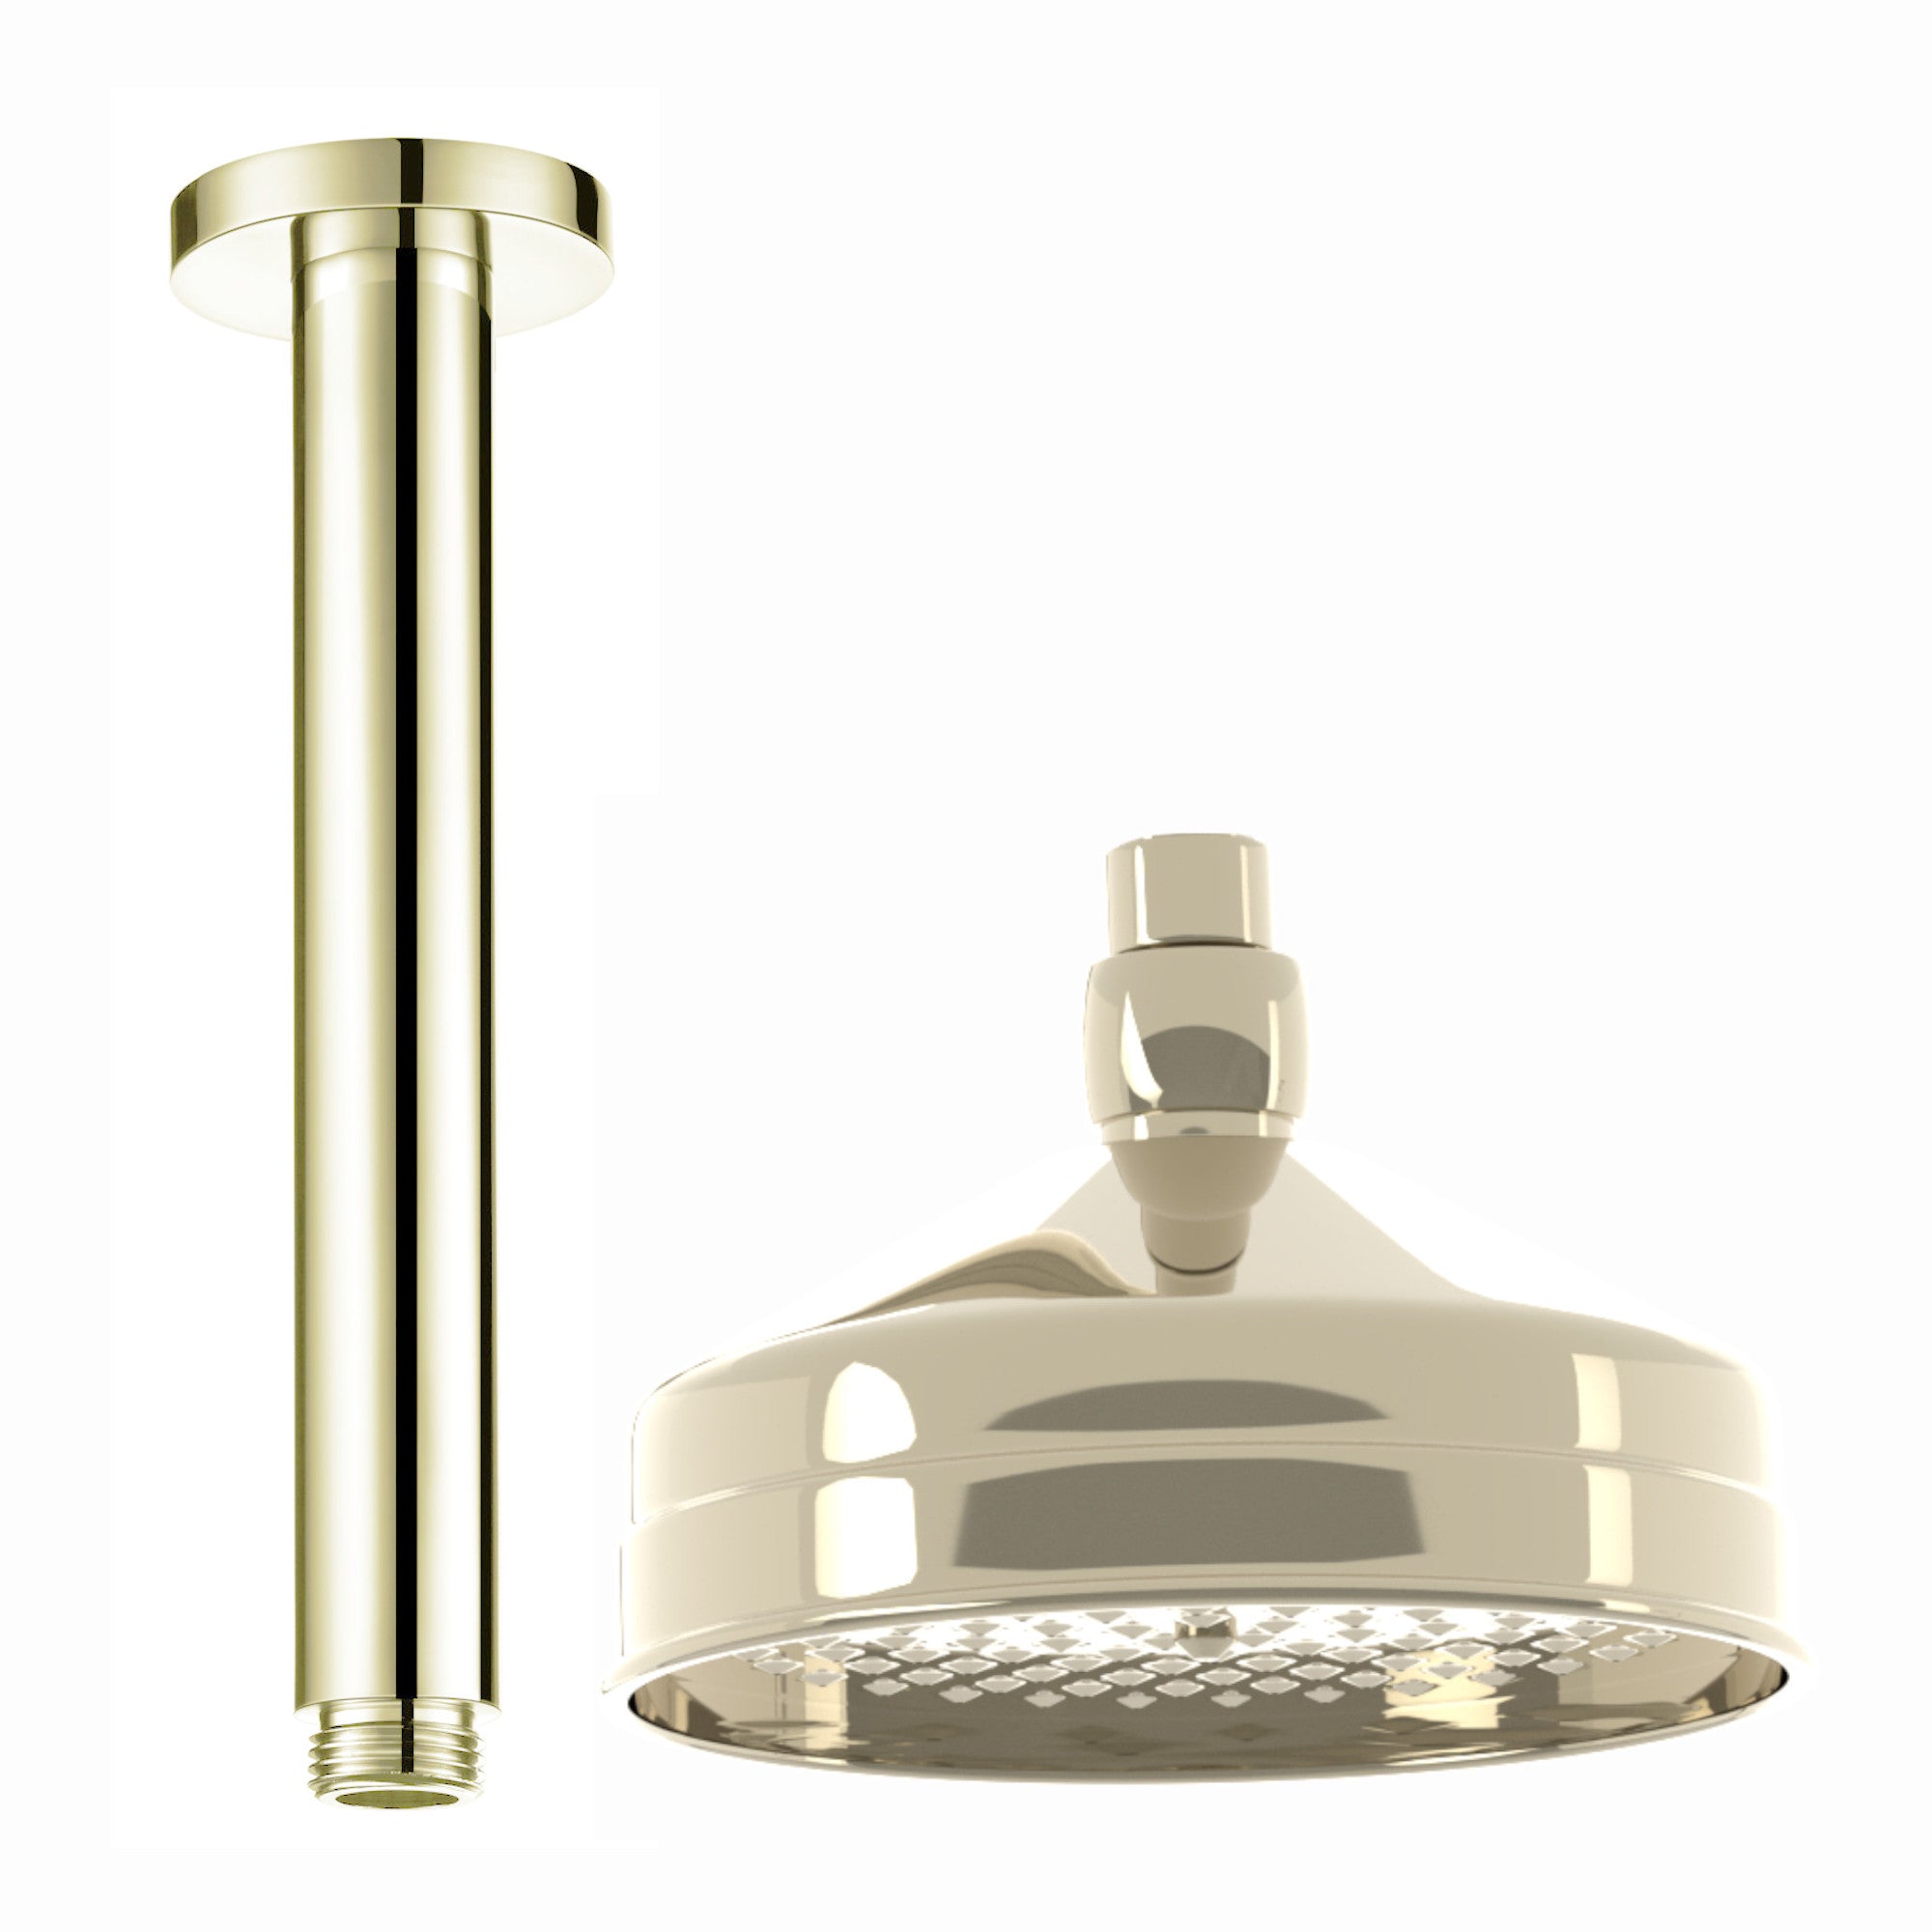 Traditional Ceiling Fixed Apron Brass Shower Head 6" With 180mm Ceiling Shower Arm - English Gold